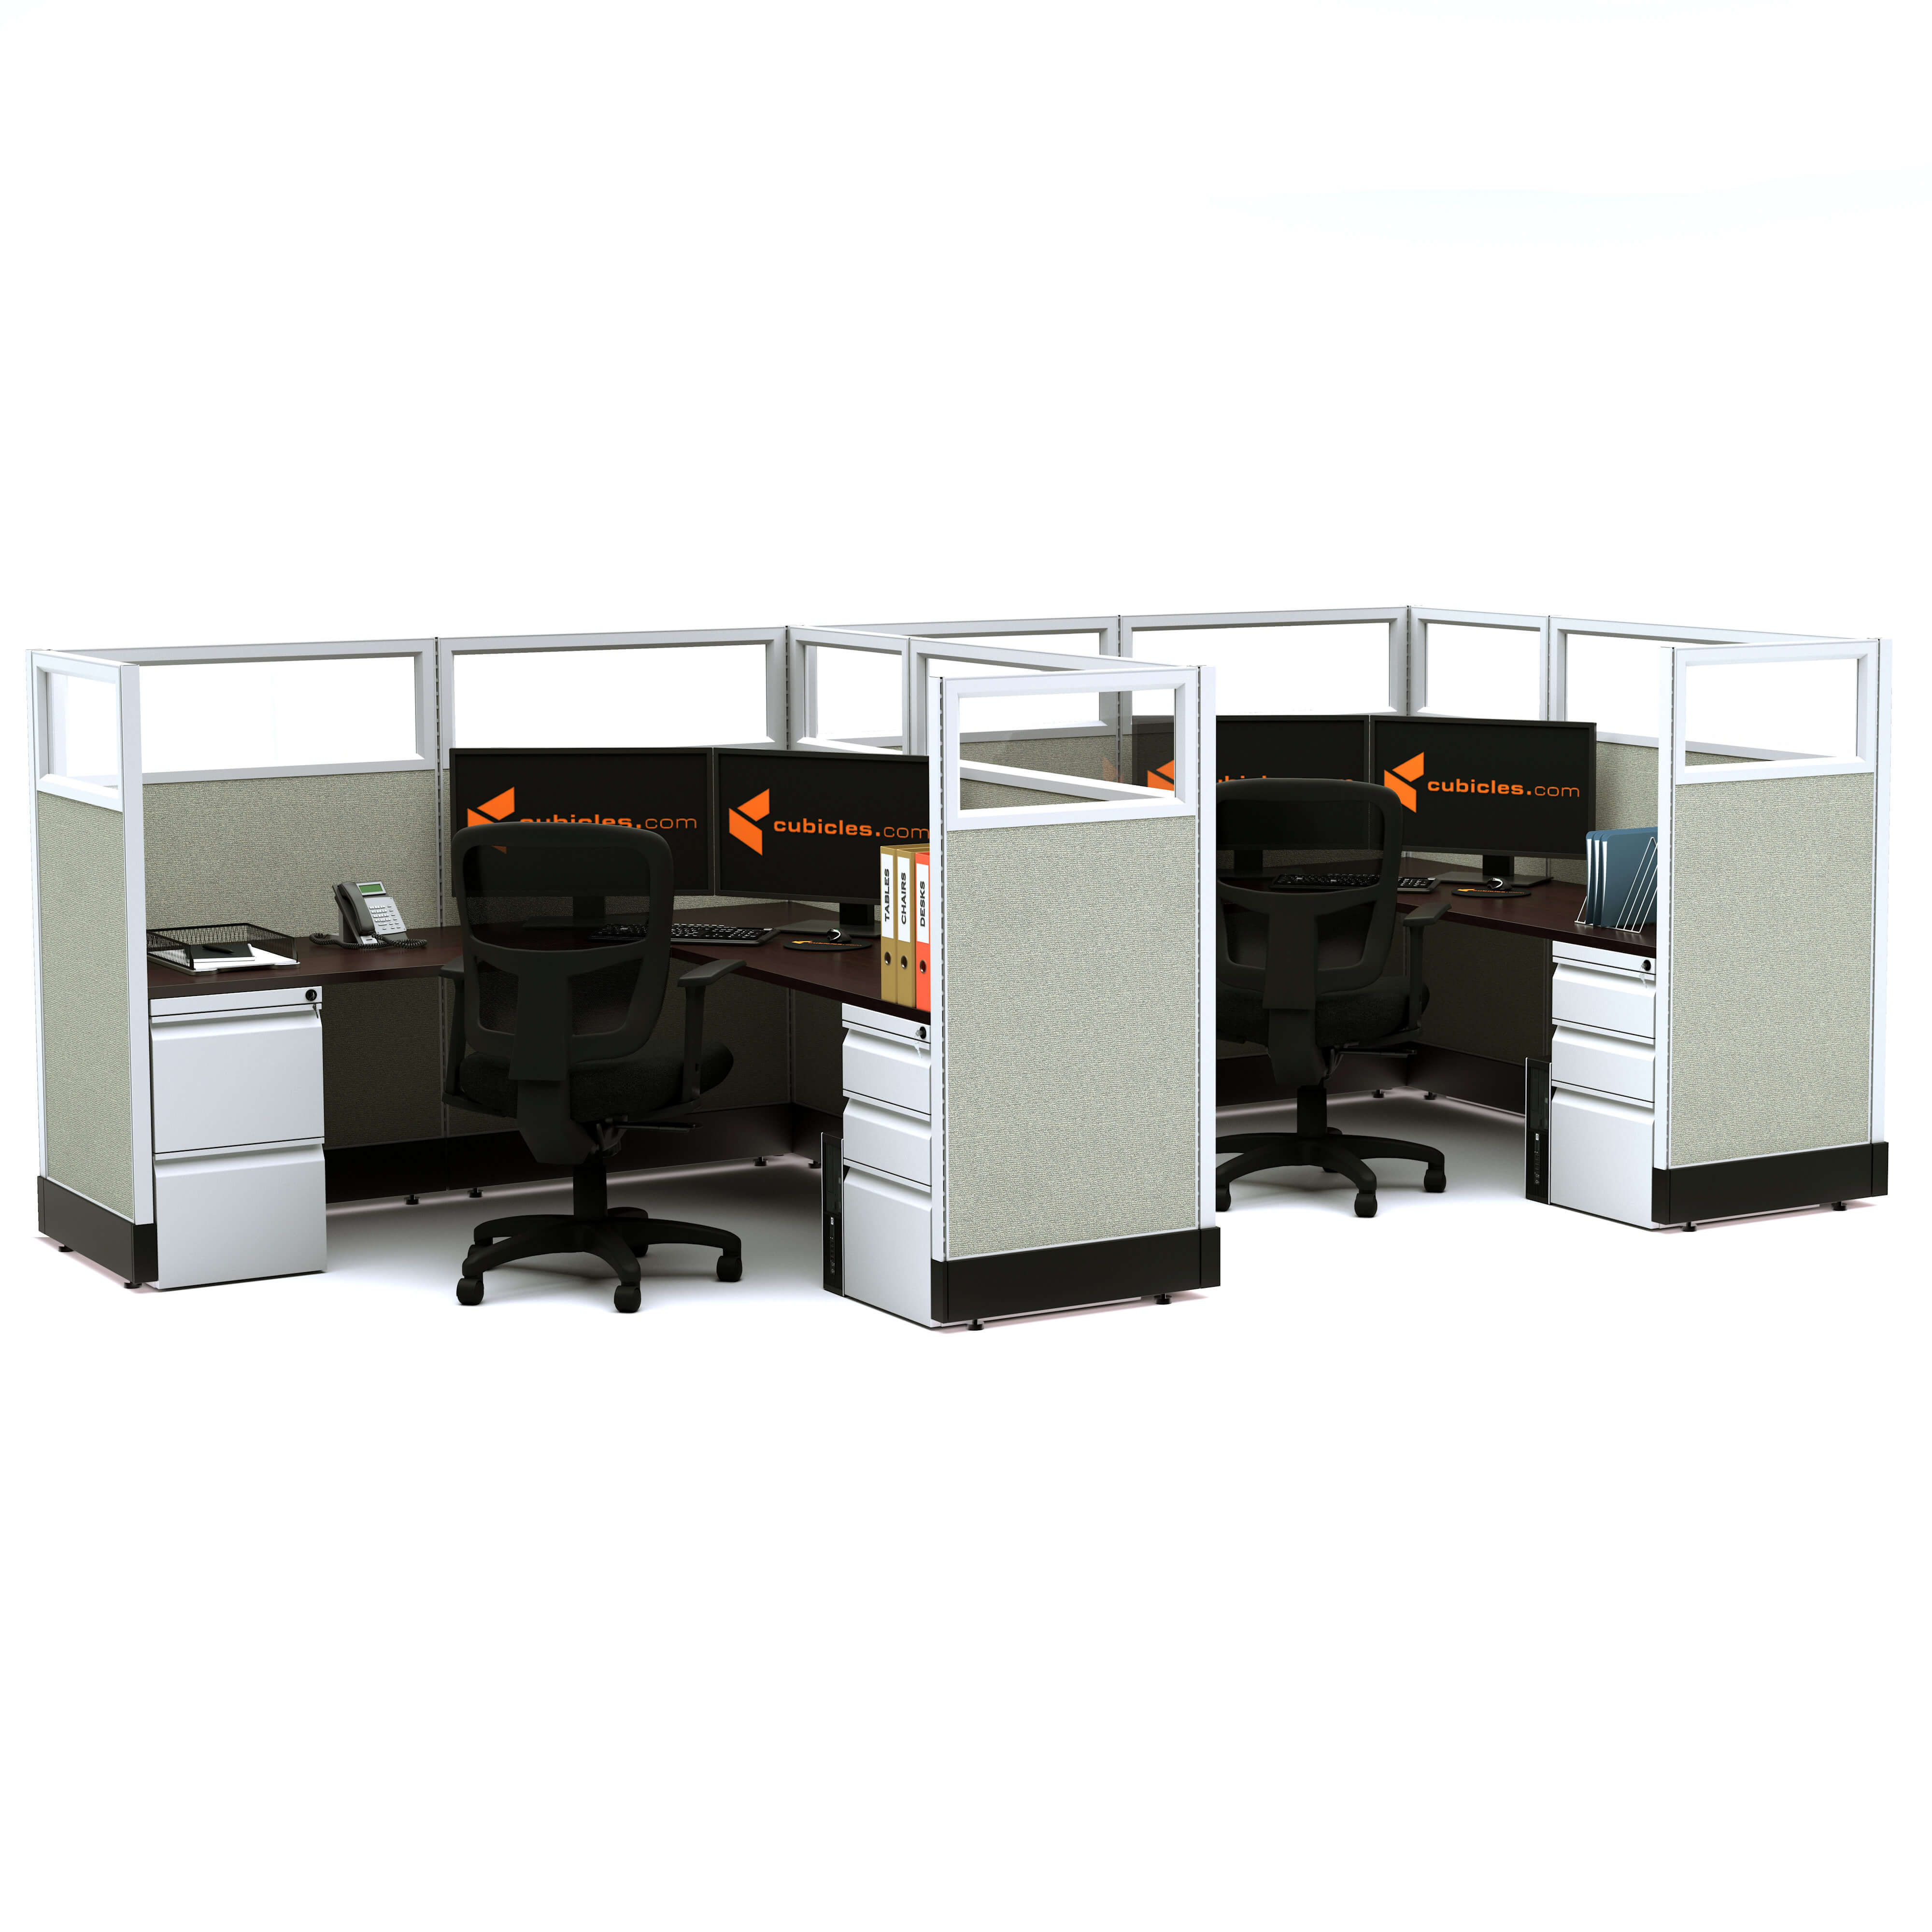 Modular office furniture glass office cubicles 53h 2pack inline